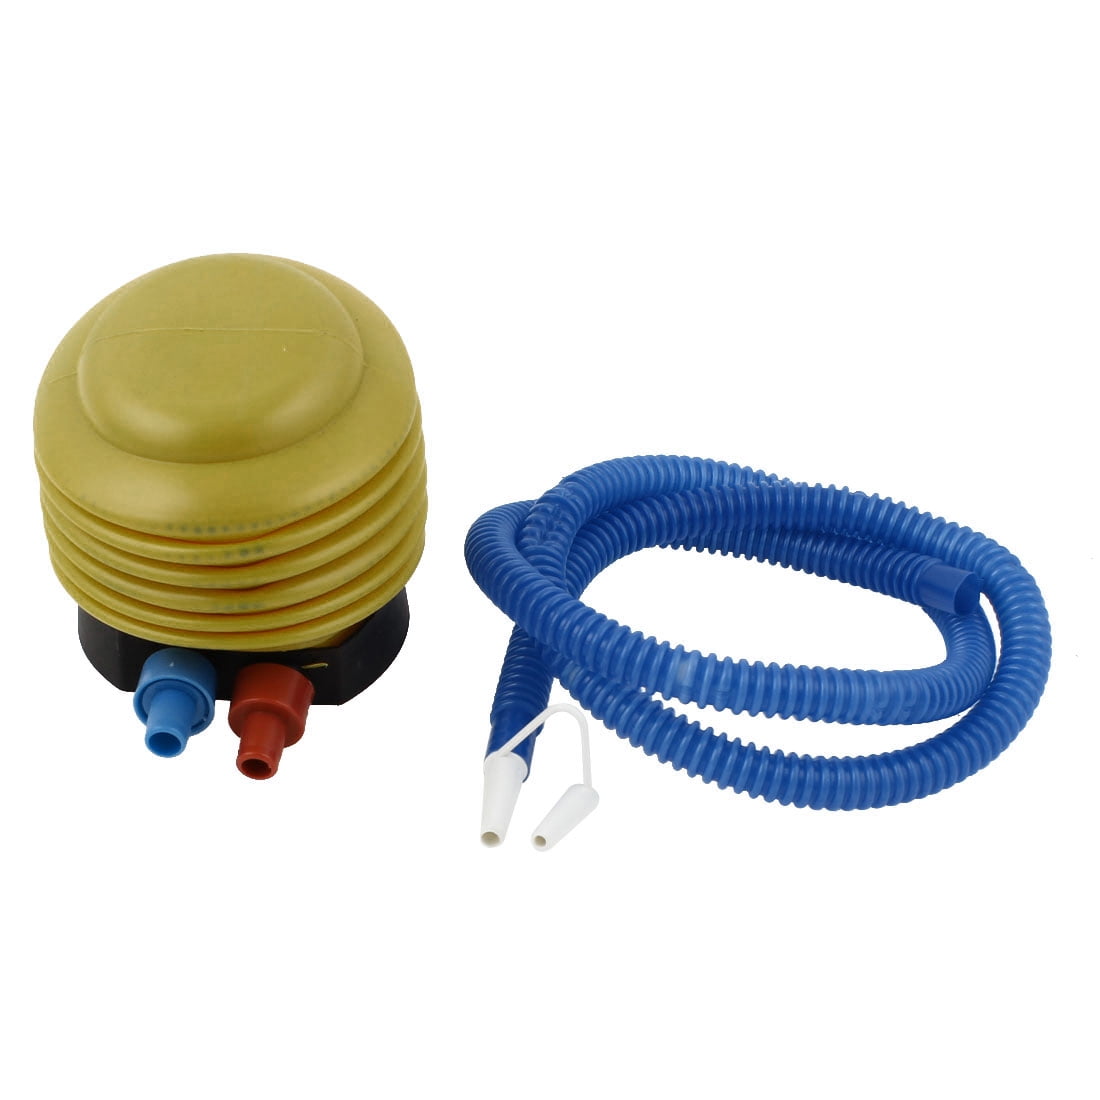 sourcingmap Balloon Easy Hand Foot Operated Air Bellow Pump Inflator Blue Yellow 